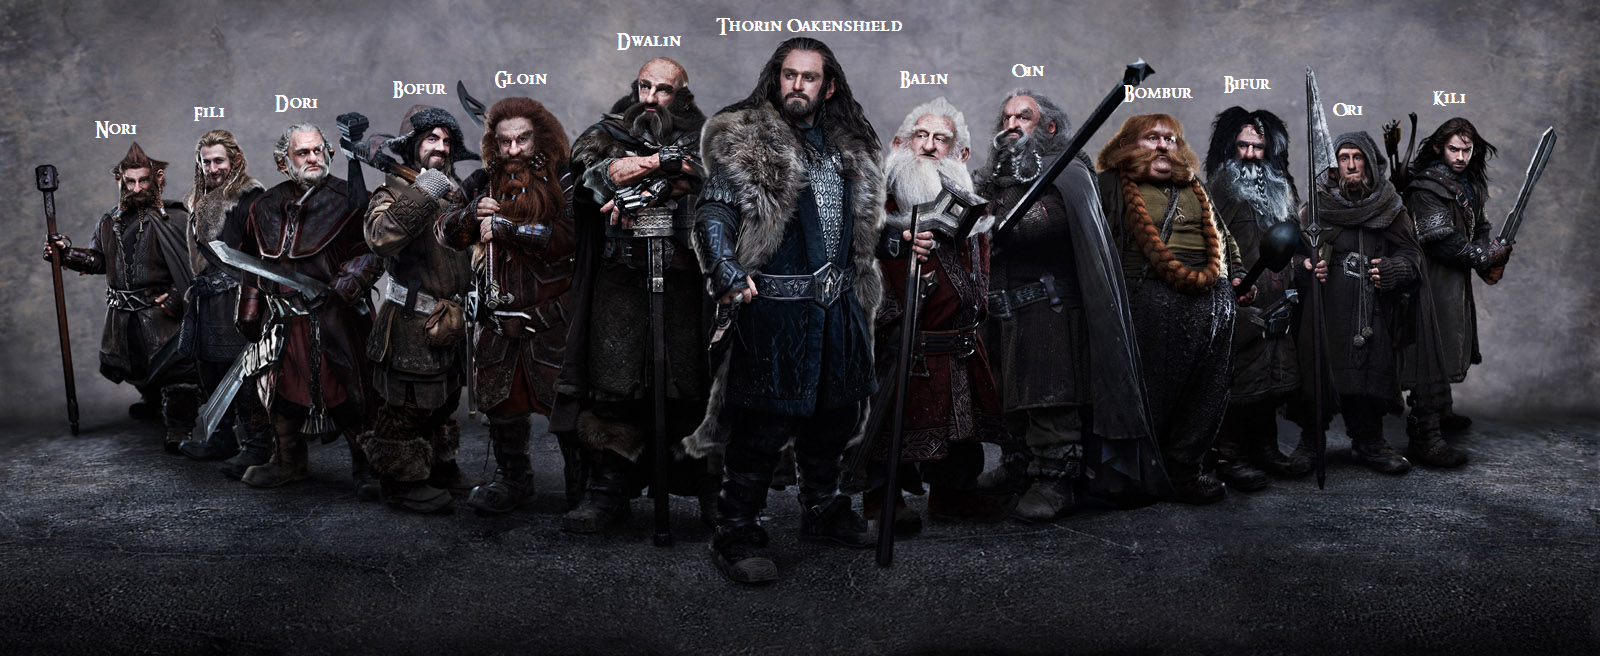 Thorin_and_Company.png